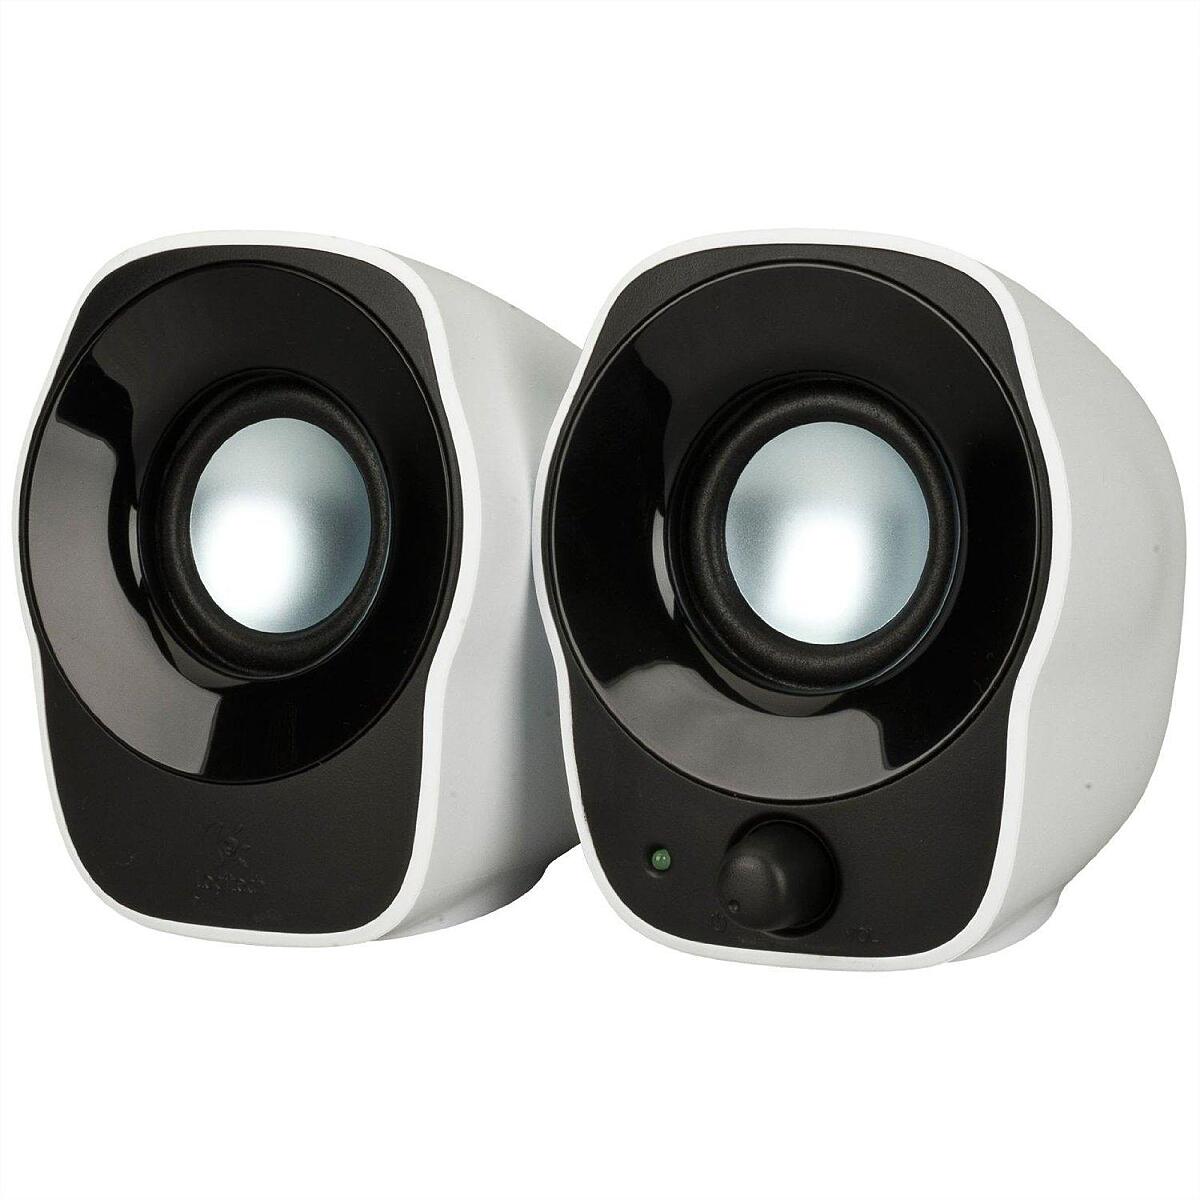 Z120 Compact Stereo Speakers